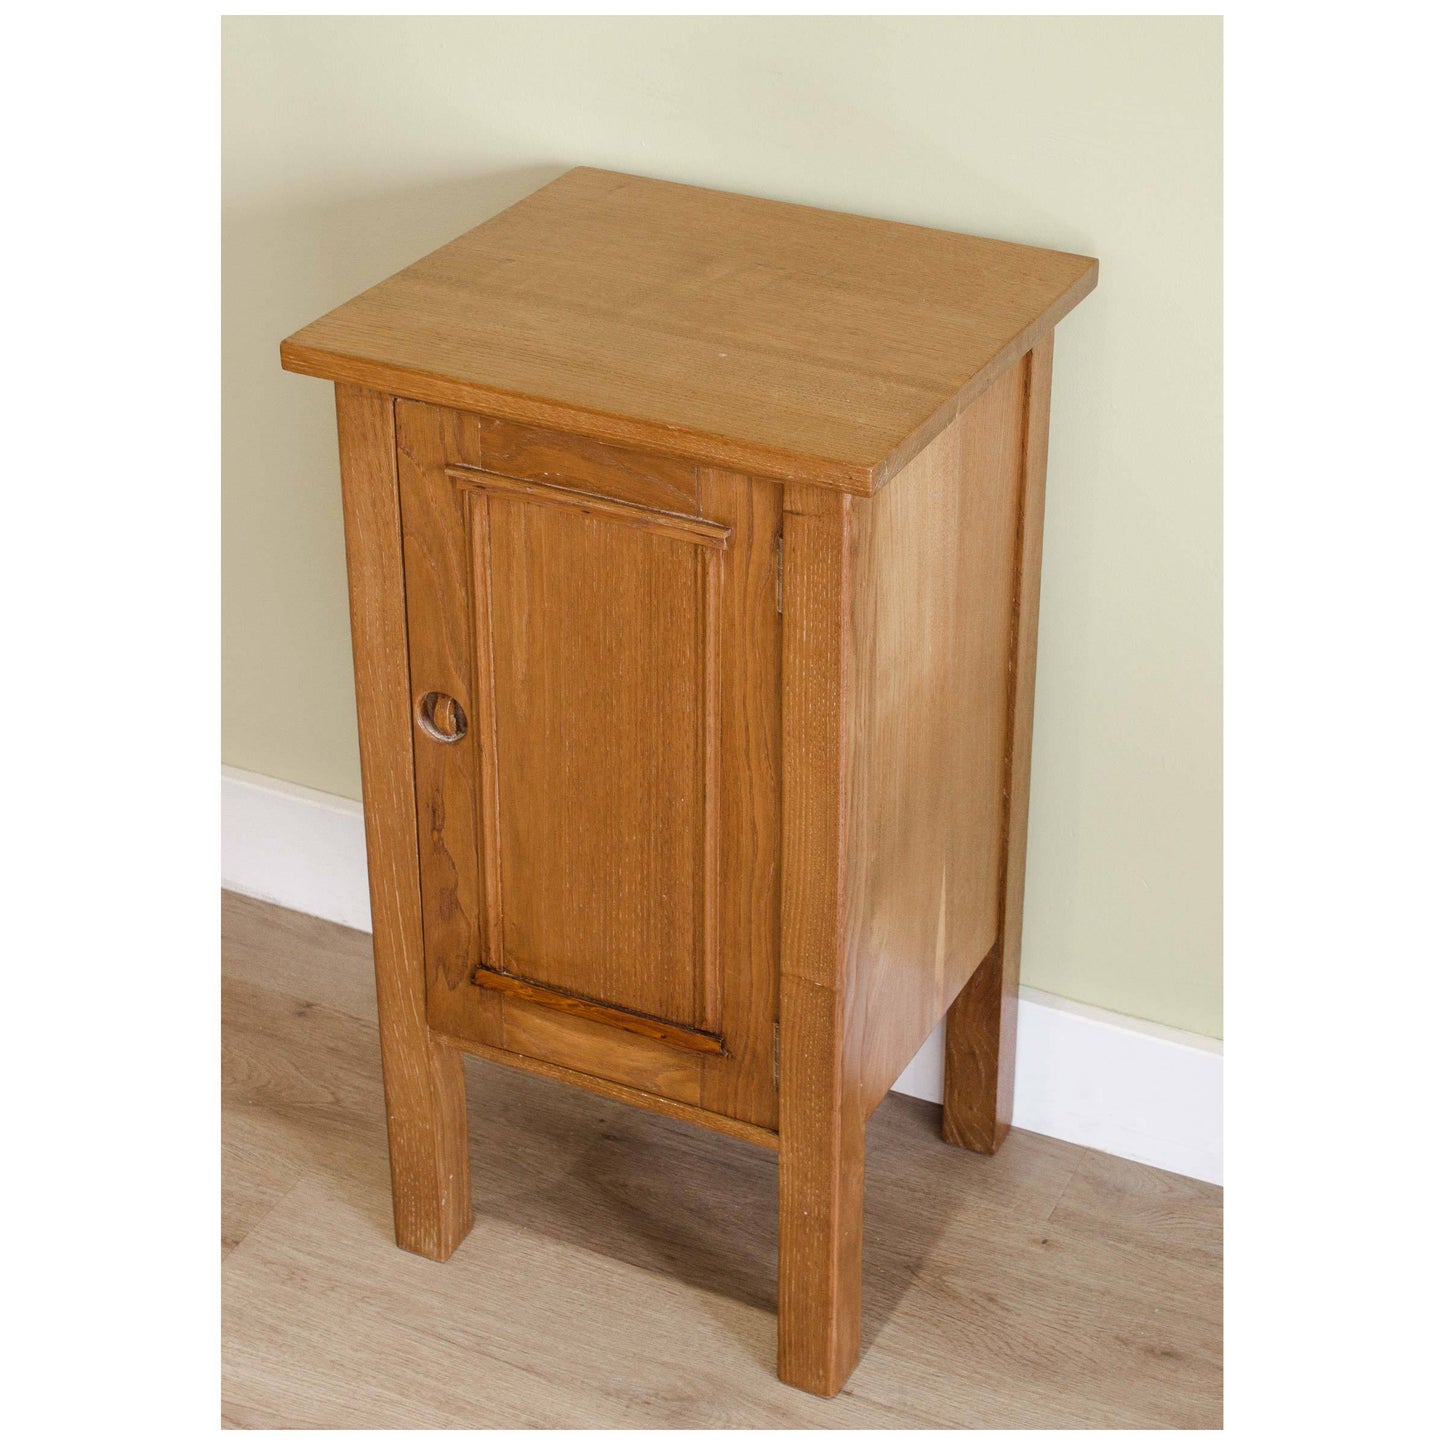 Heal and Co (Ambrose Heal) Ambrose Heal Rare Arts and Crafts Sweet Chestnut Bedside Table C. 1905